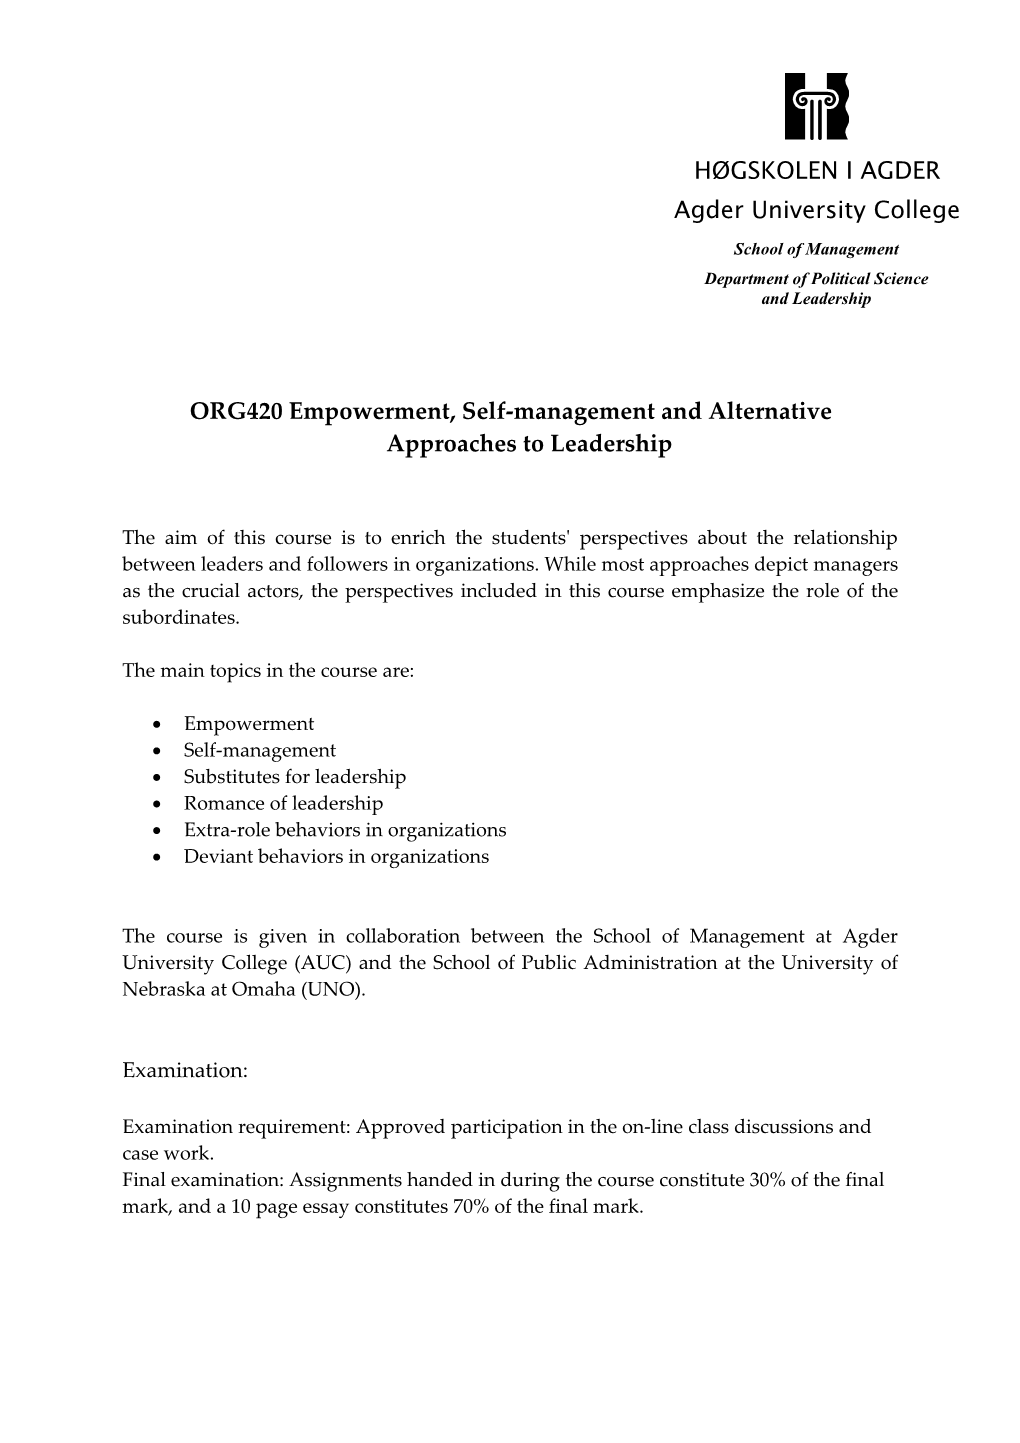 ORG420 Empowerment, Self-Management and Alternative Approaches to Leadership